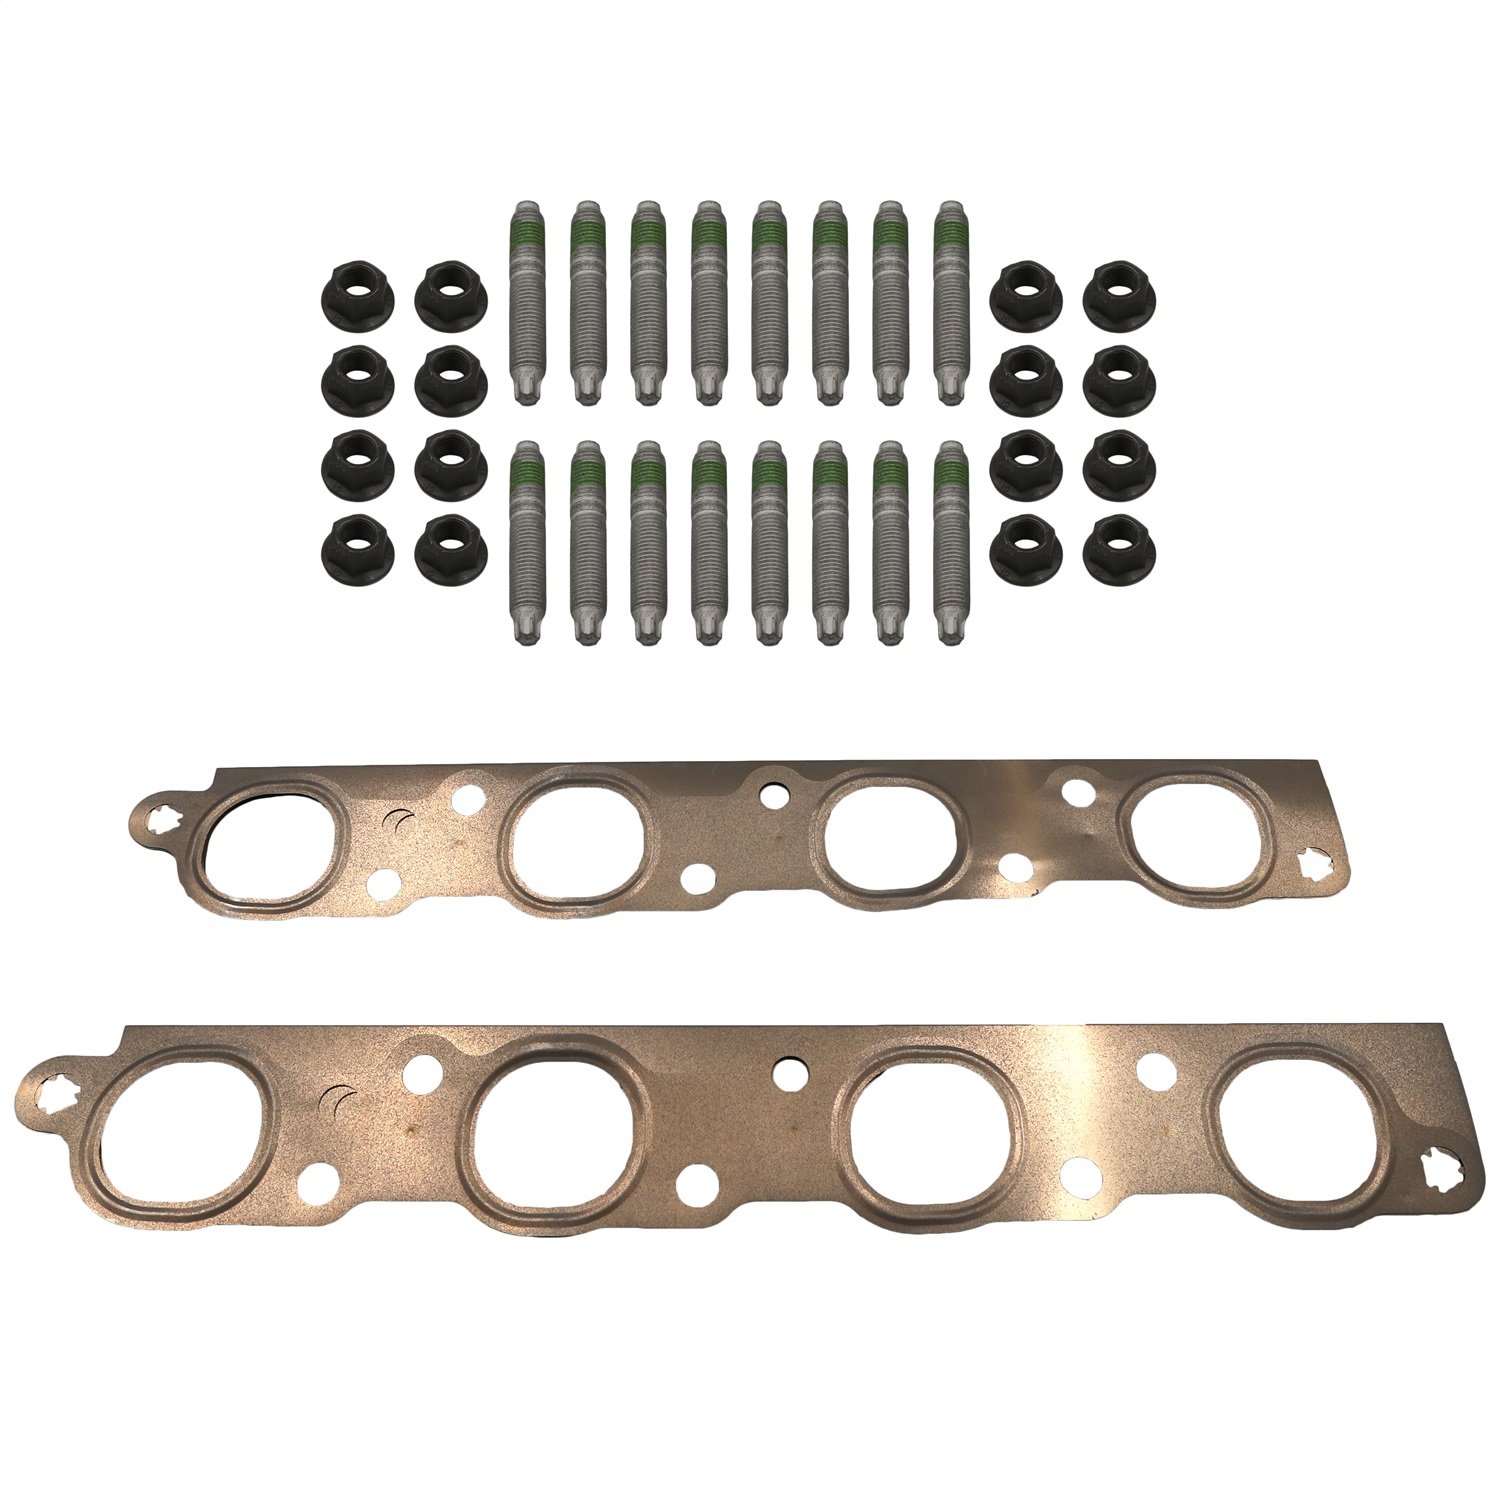 7.3L GAS EXHAUST GASKETS